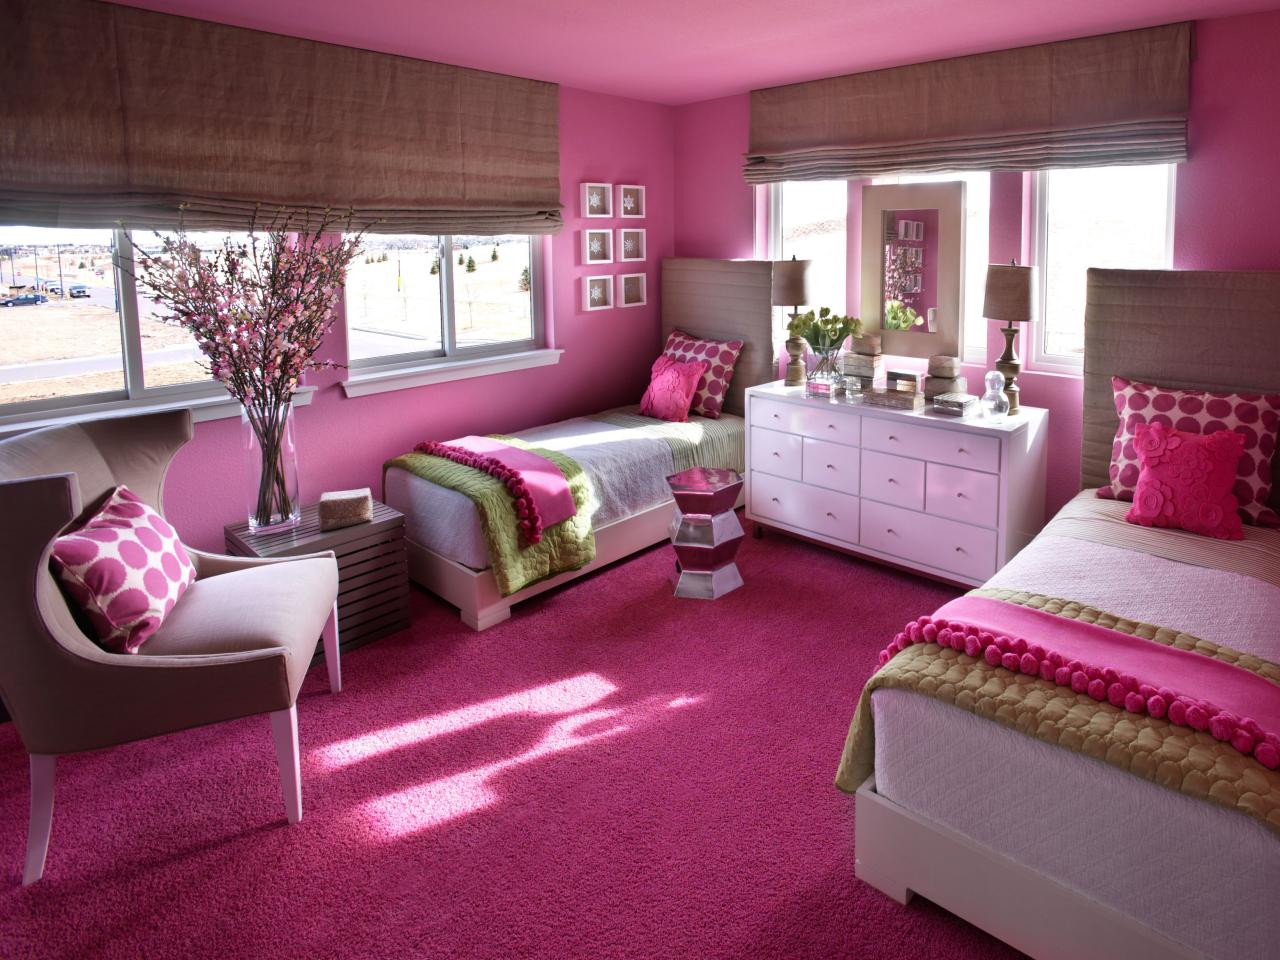 20 Bedroom Color Ideas To Make Your Room Awesome Houseminds within size 1280 X 960